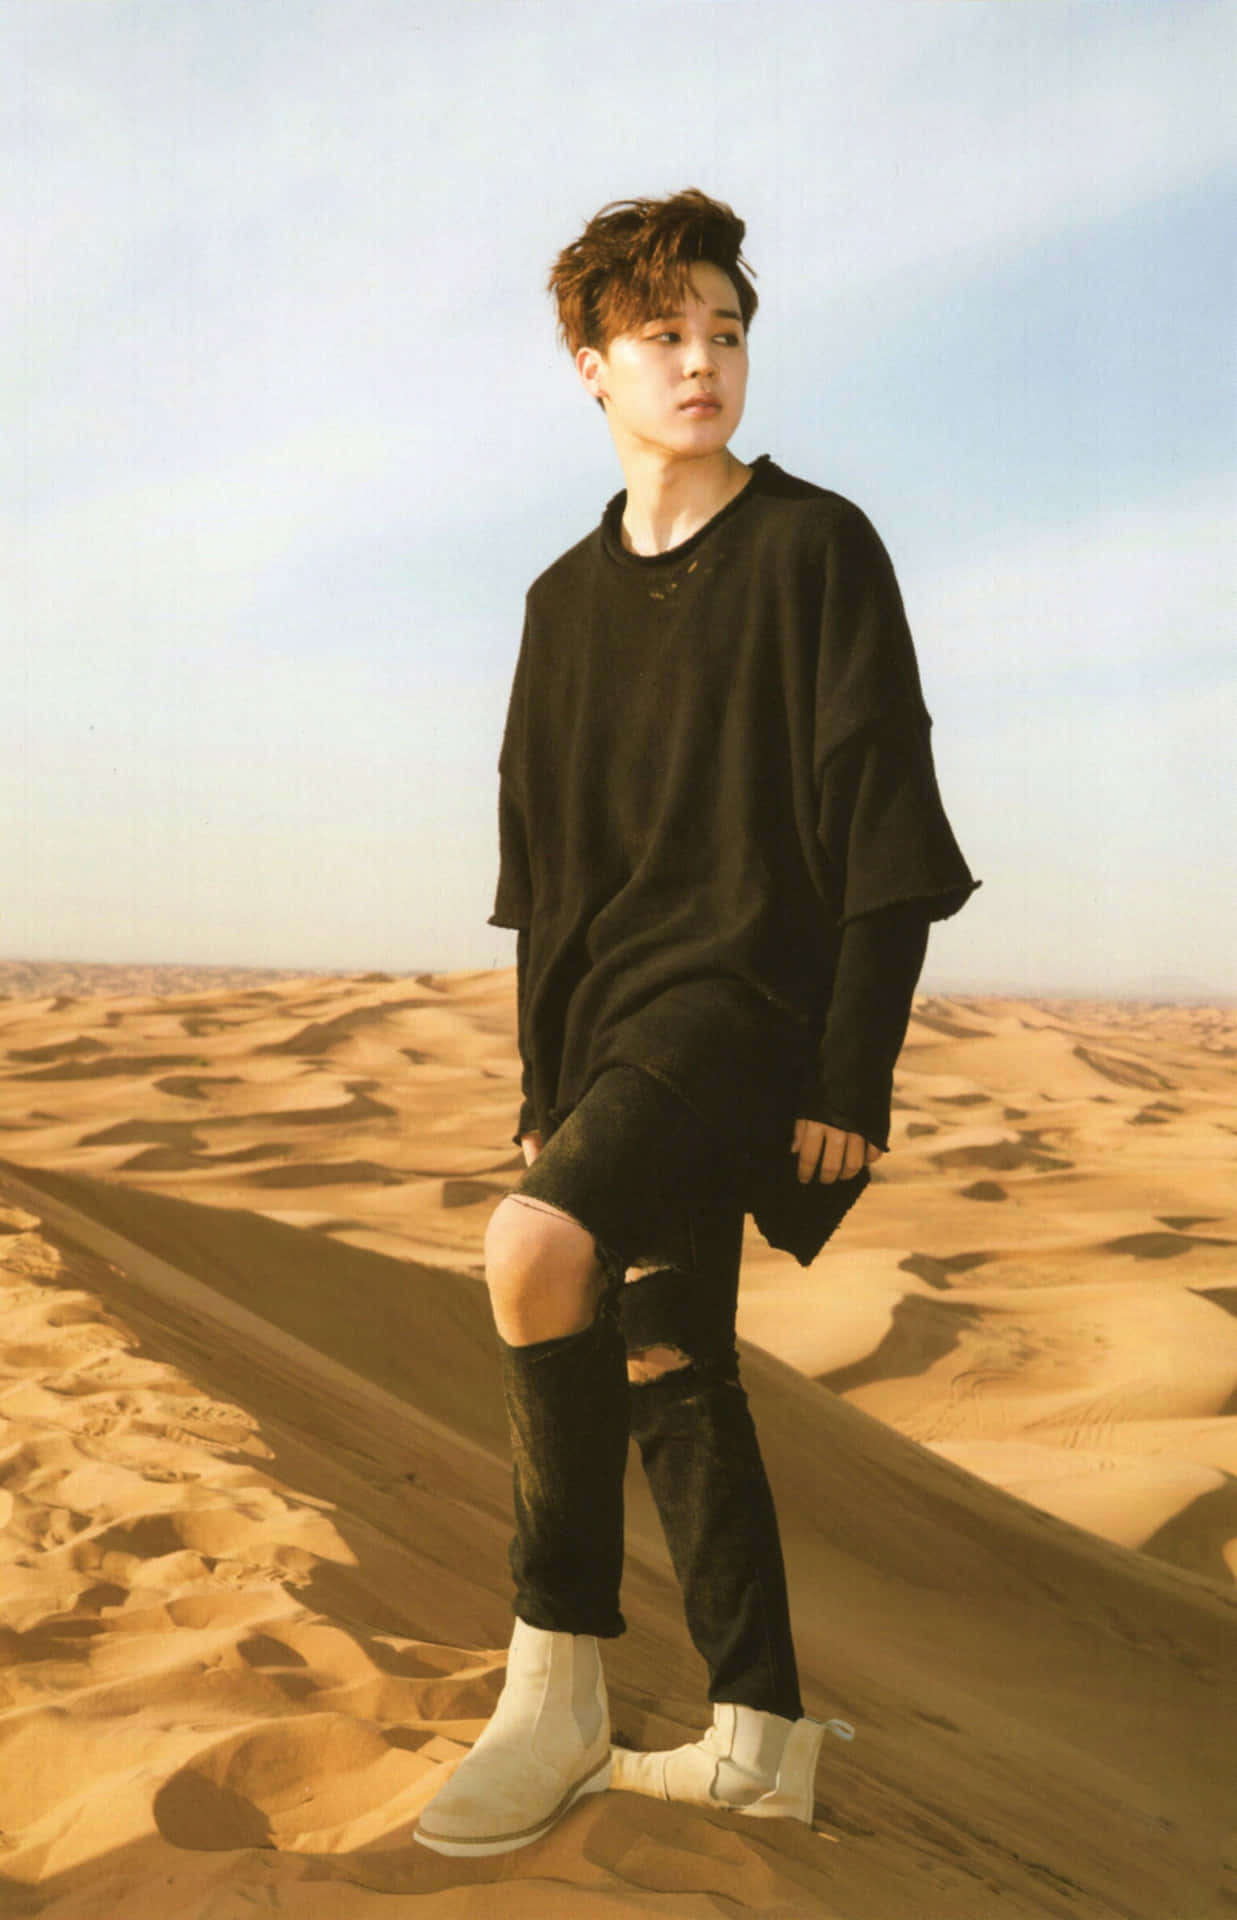 Photoshoot Of Jimin In A Desert Picture